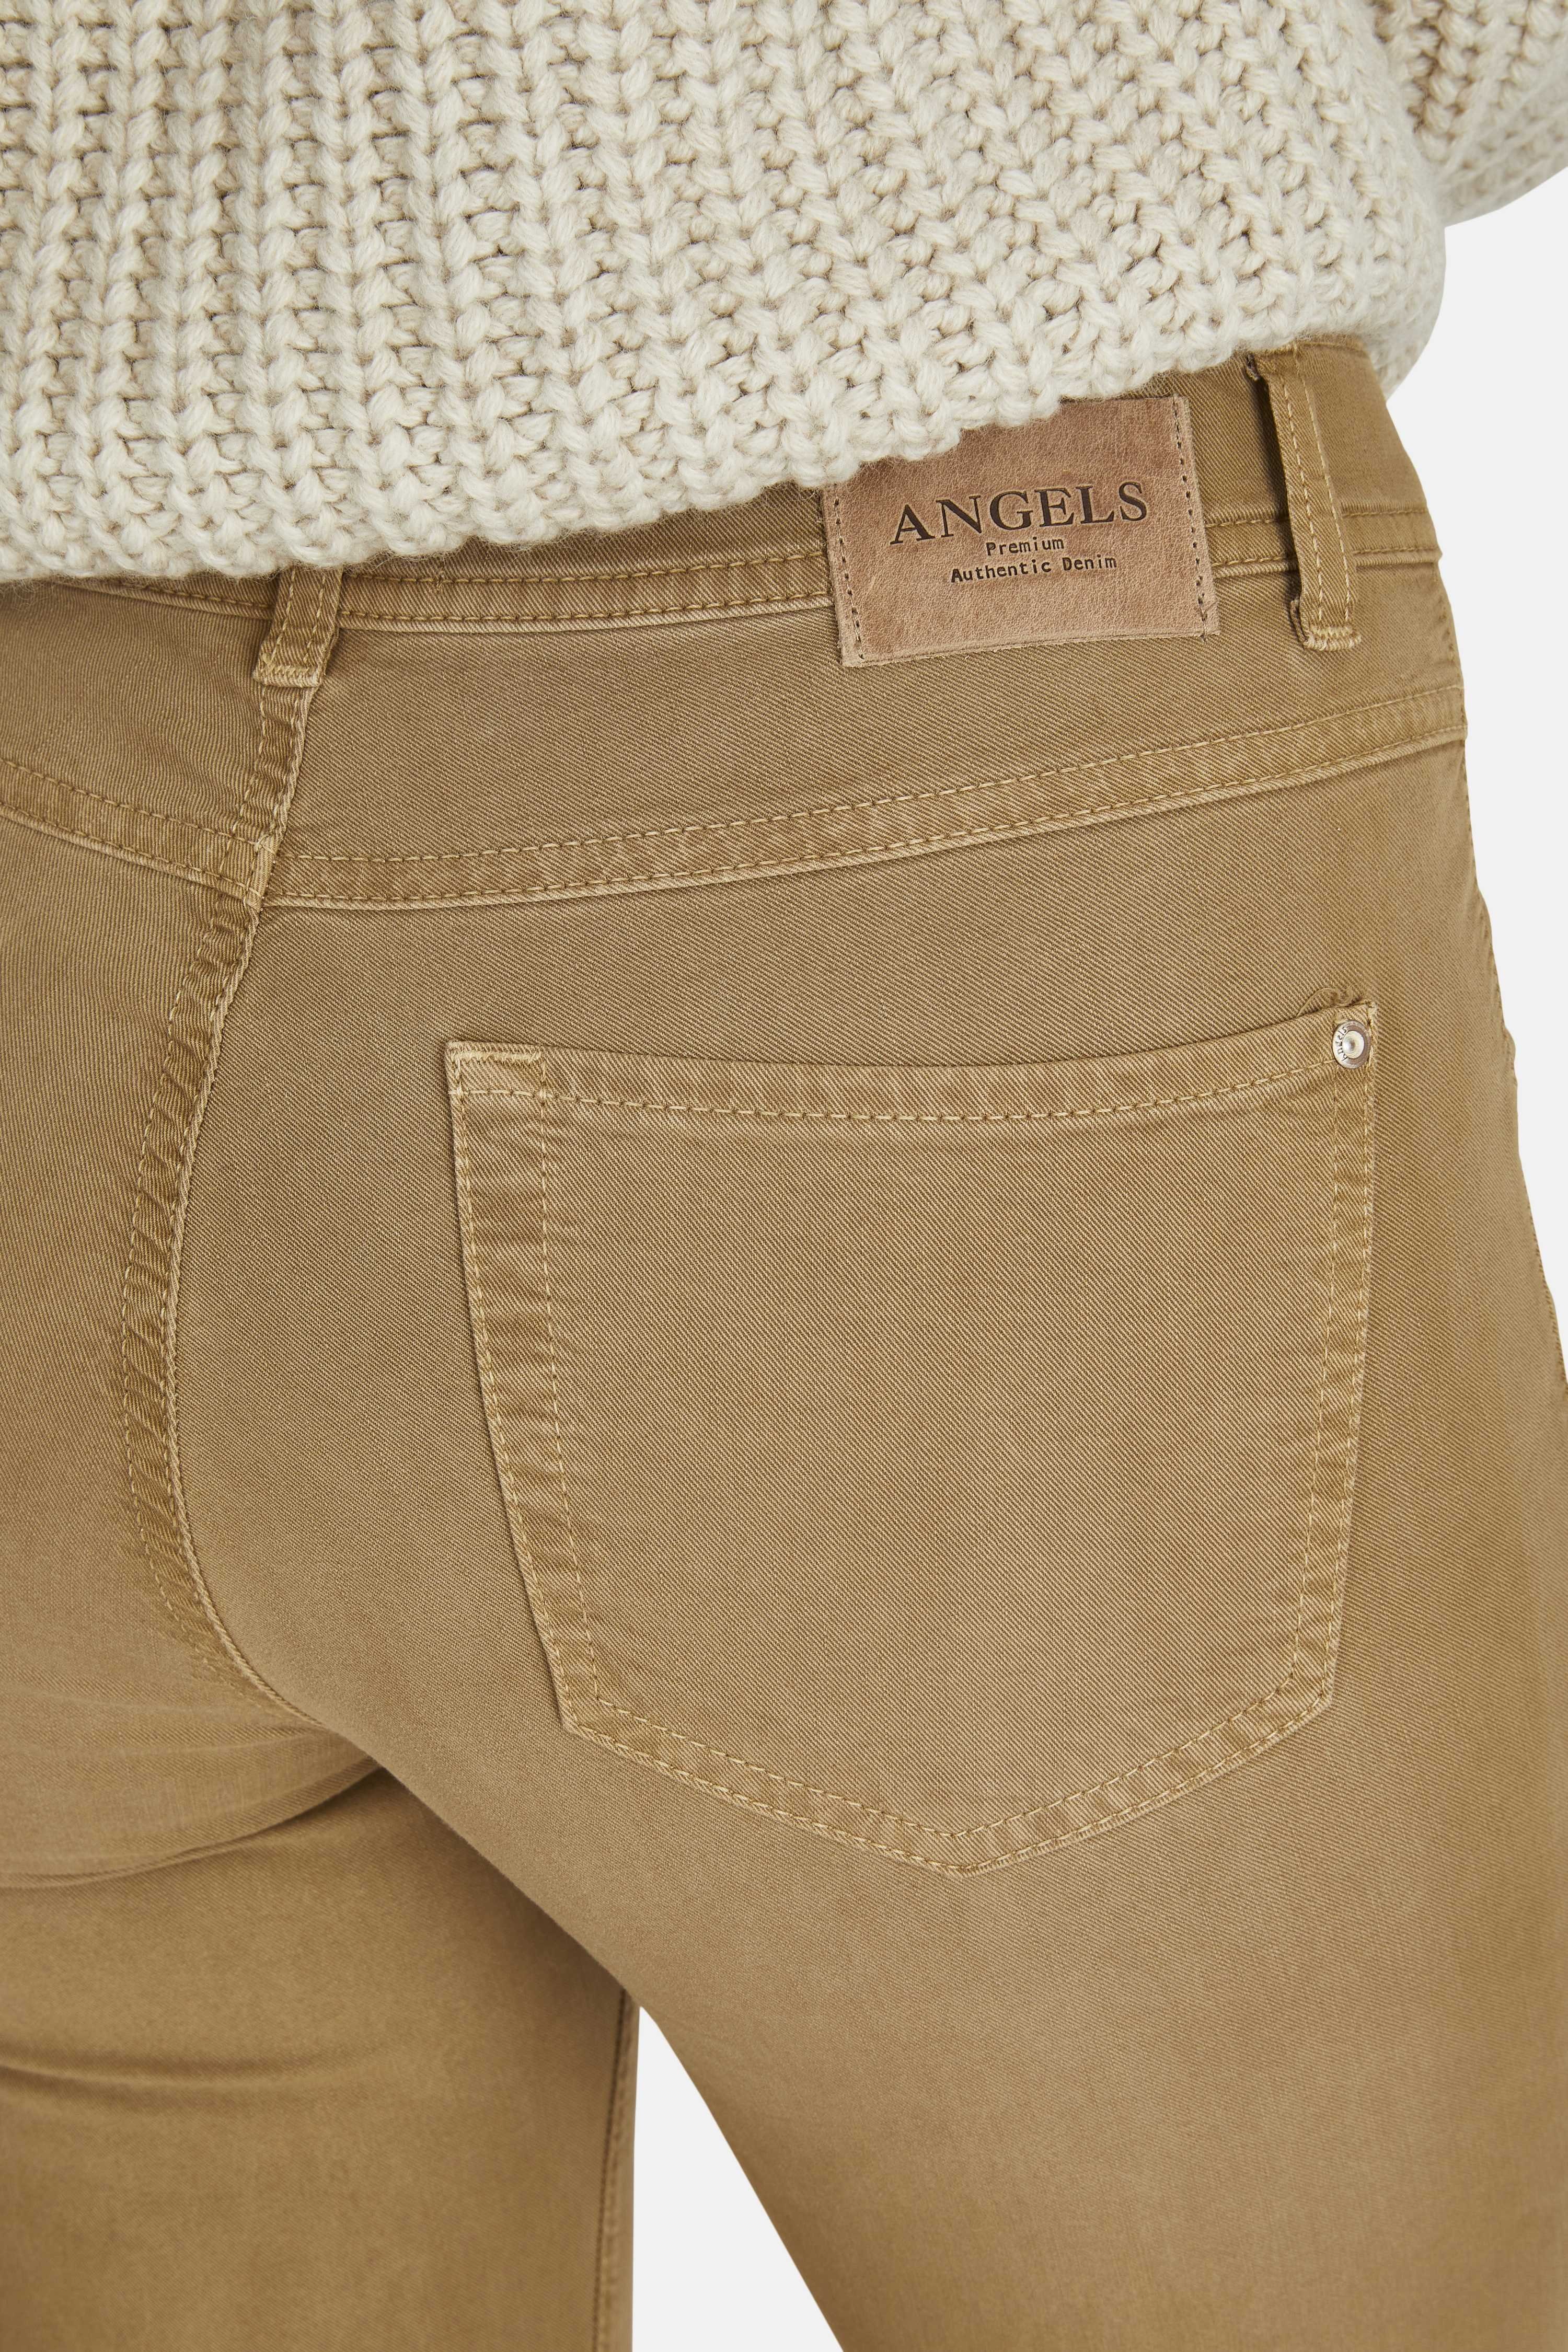 ANGELS Stretch-Jeans ANGELS used JEANS ORNELLA 680307.7275 safari 178 BUTTON